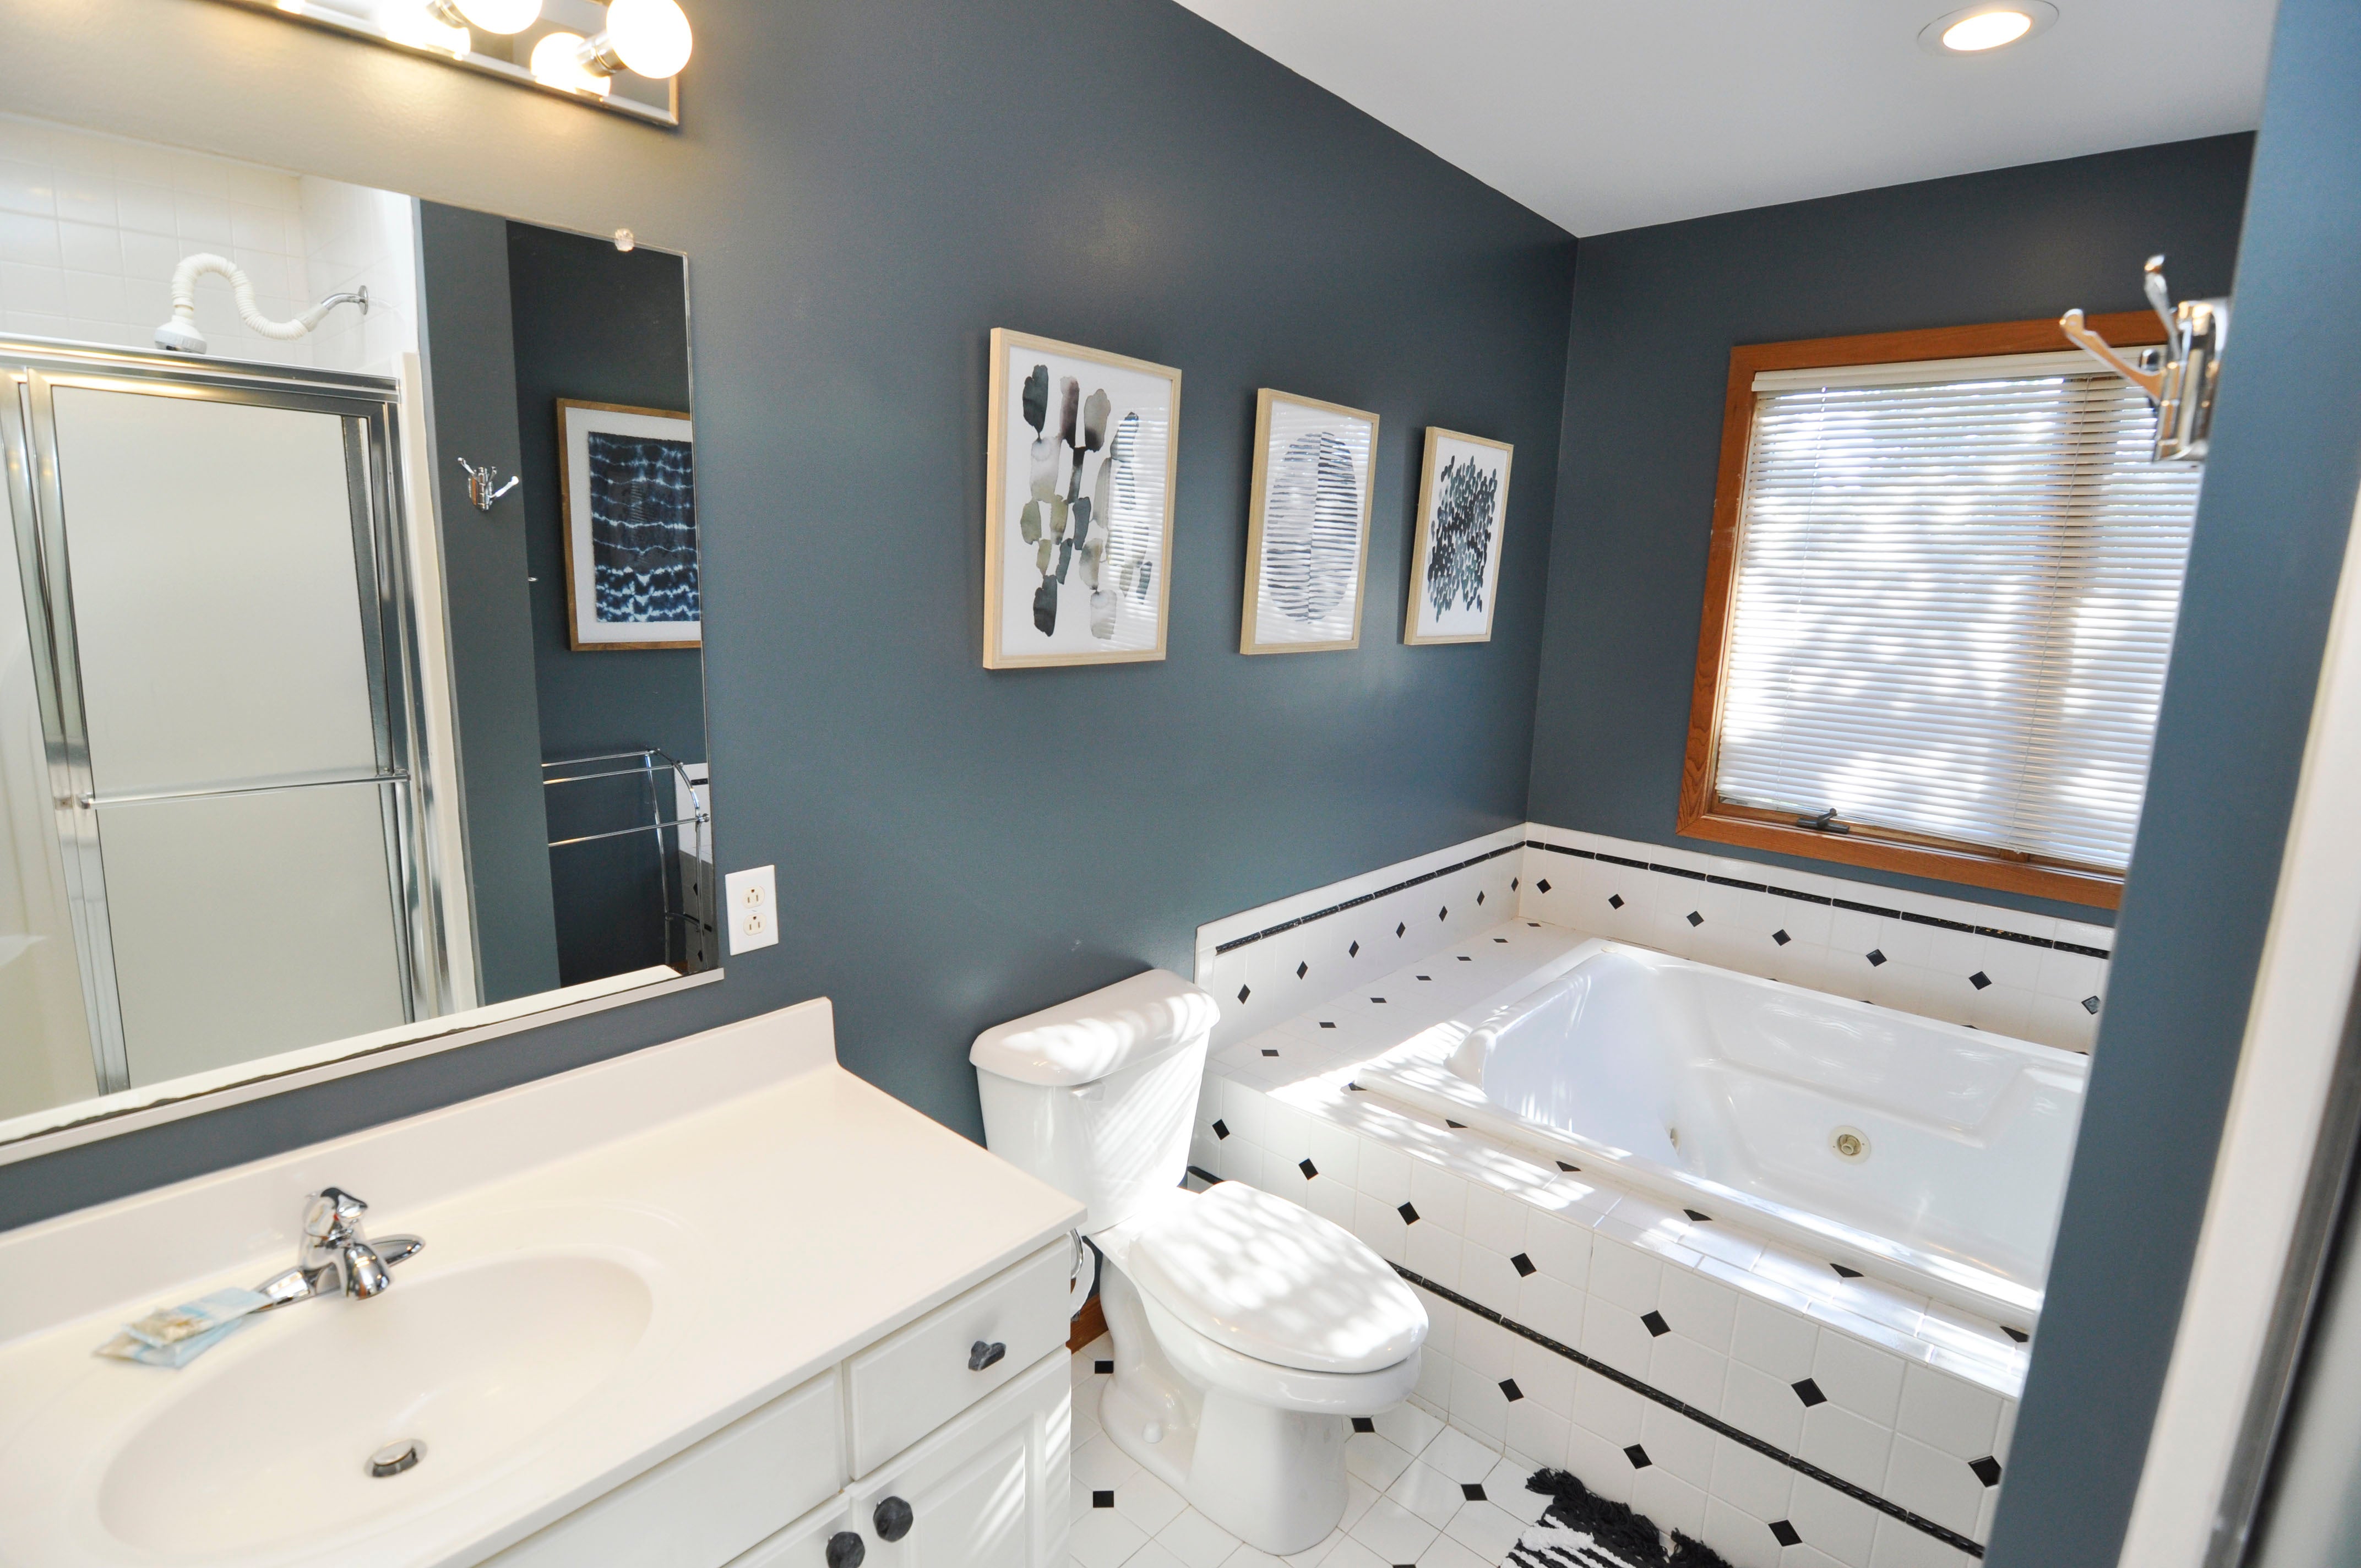 Bathroom with Stall Shower and Whirlpool Tub, Second Floor